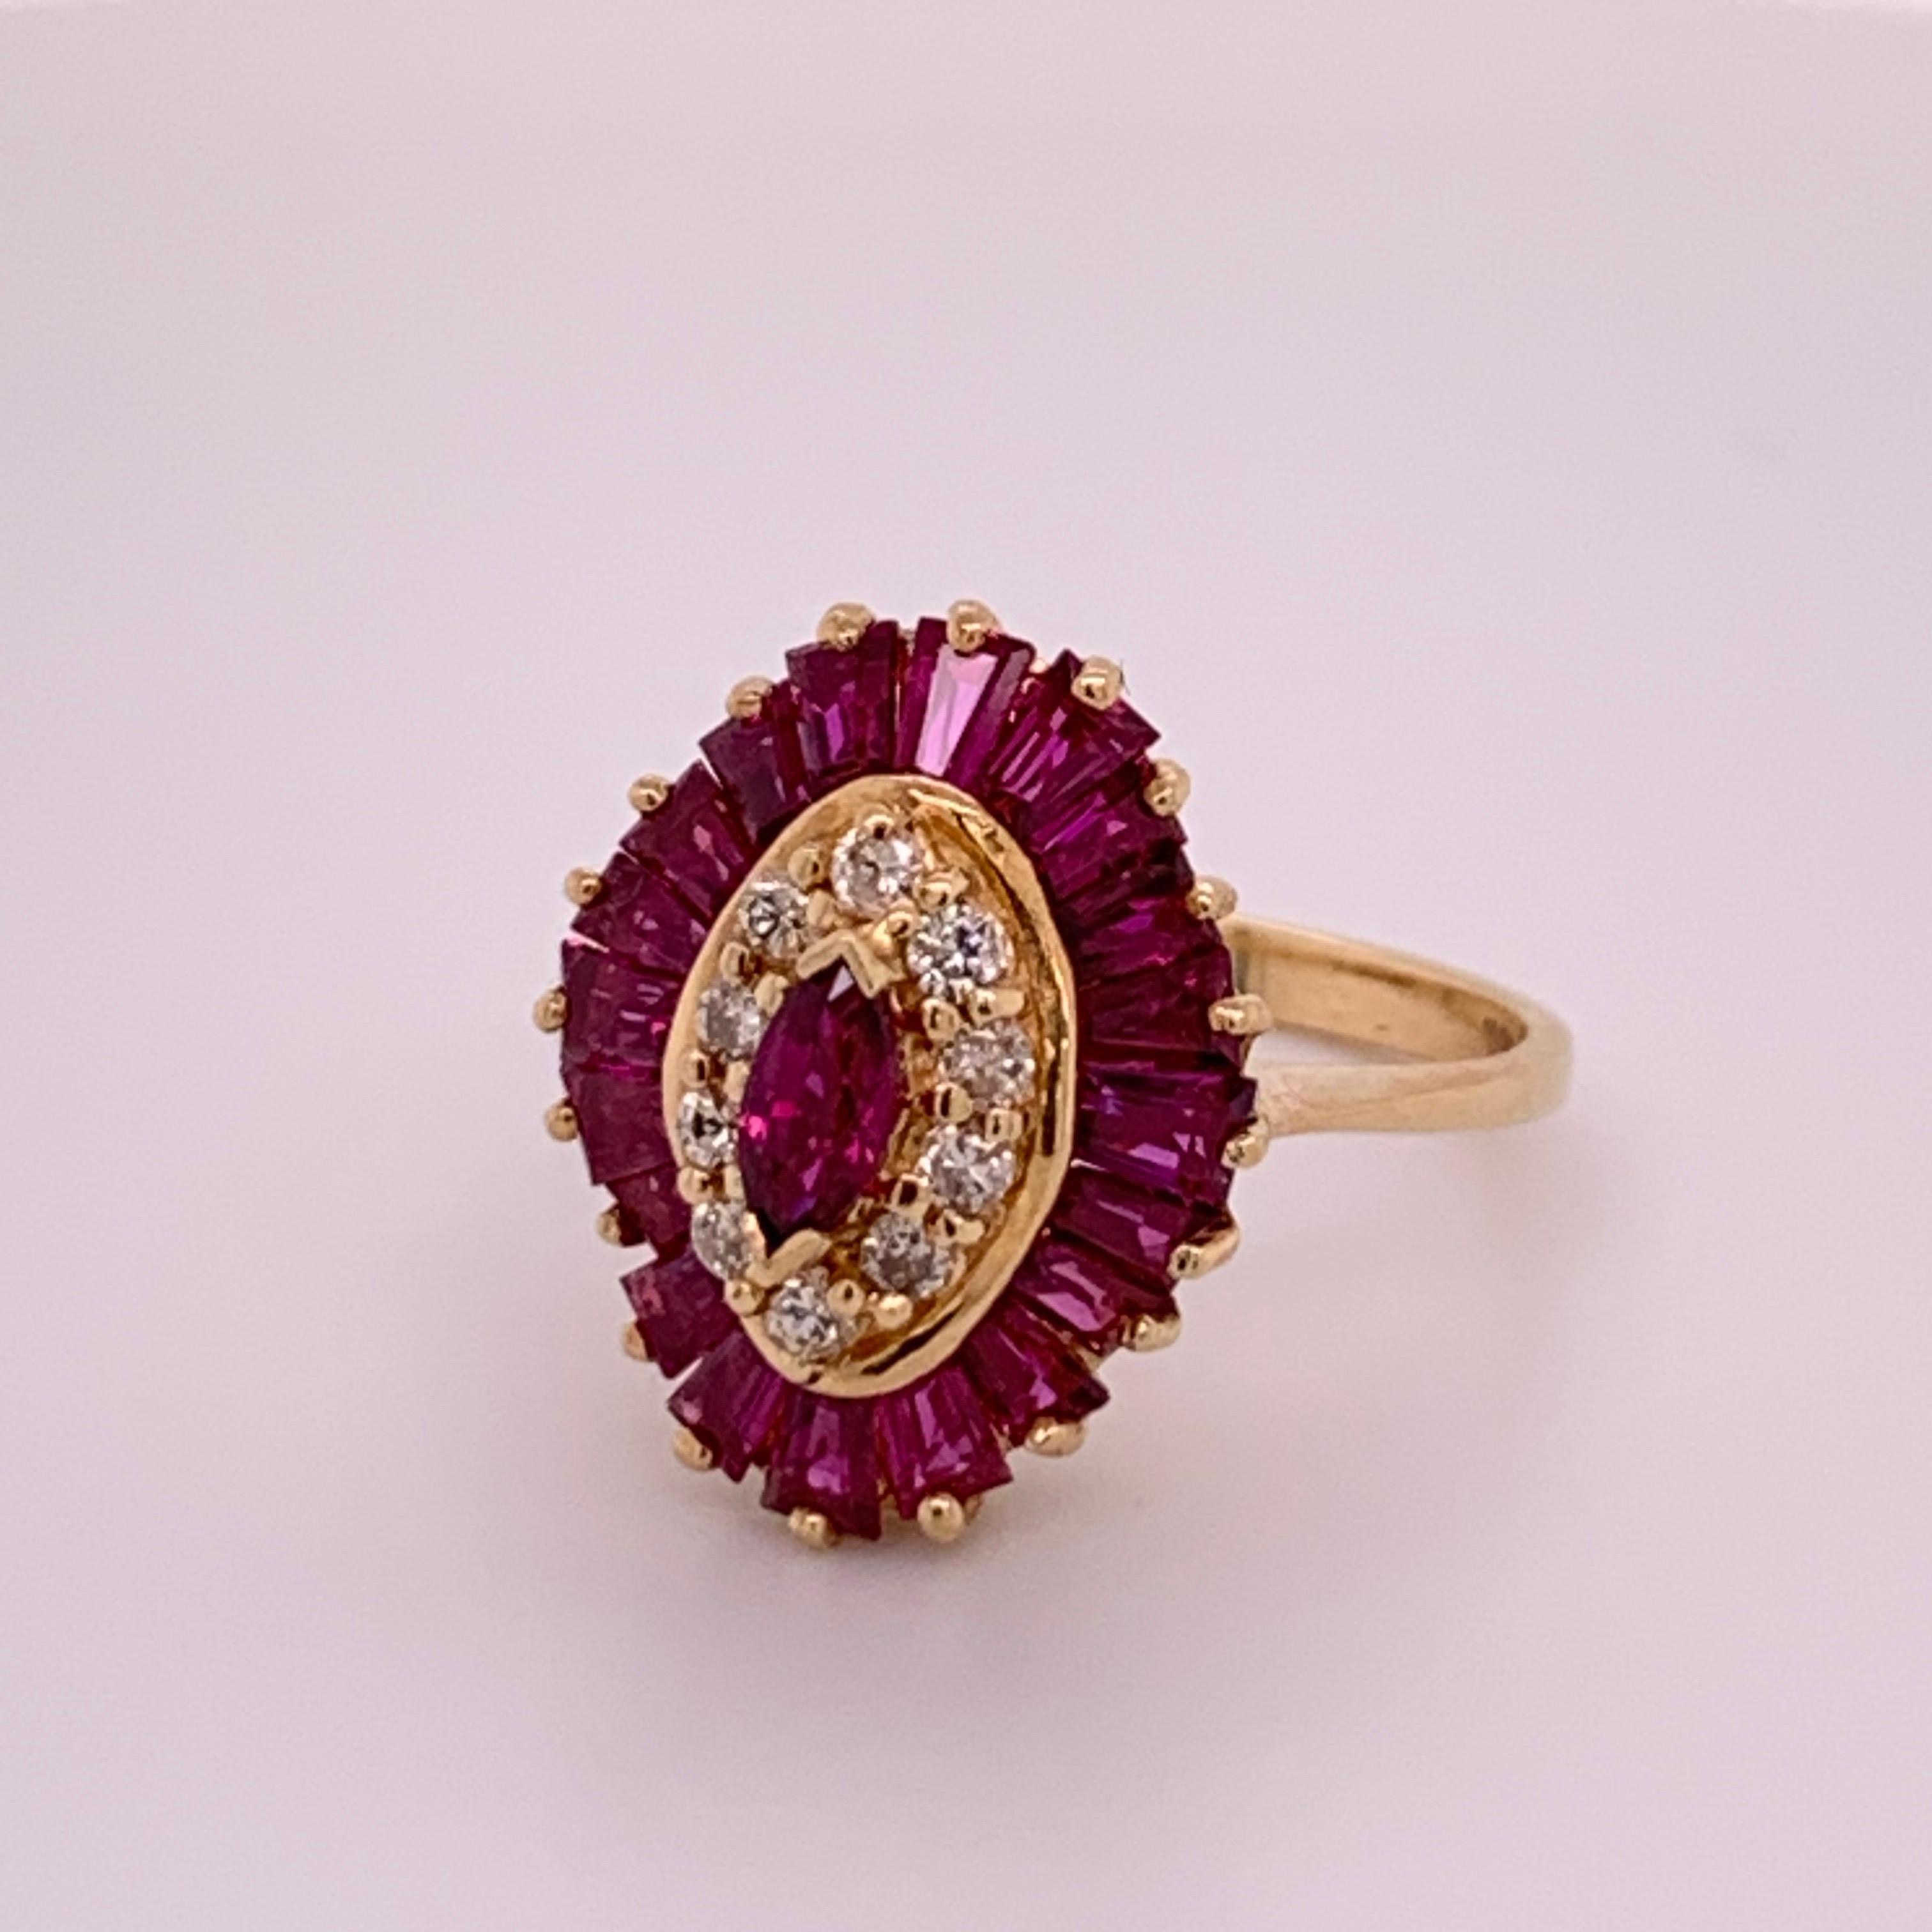 14k yellow gold ballerina ring with a “B” Hallmark. Size 6.25. 

The natural baguette (20) rubies measure 3.2x2.3mm and marquise (1) ruby measures 5.5x2.7mm. The ring is set with 10 round brilliant diamonds. 